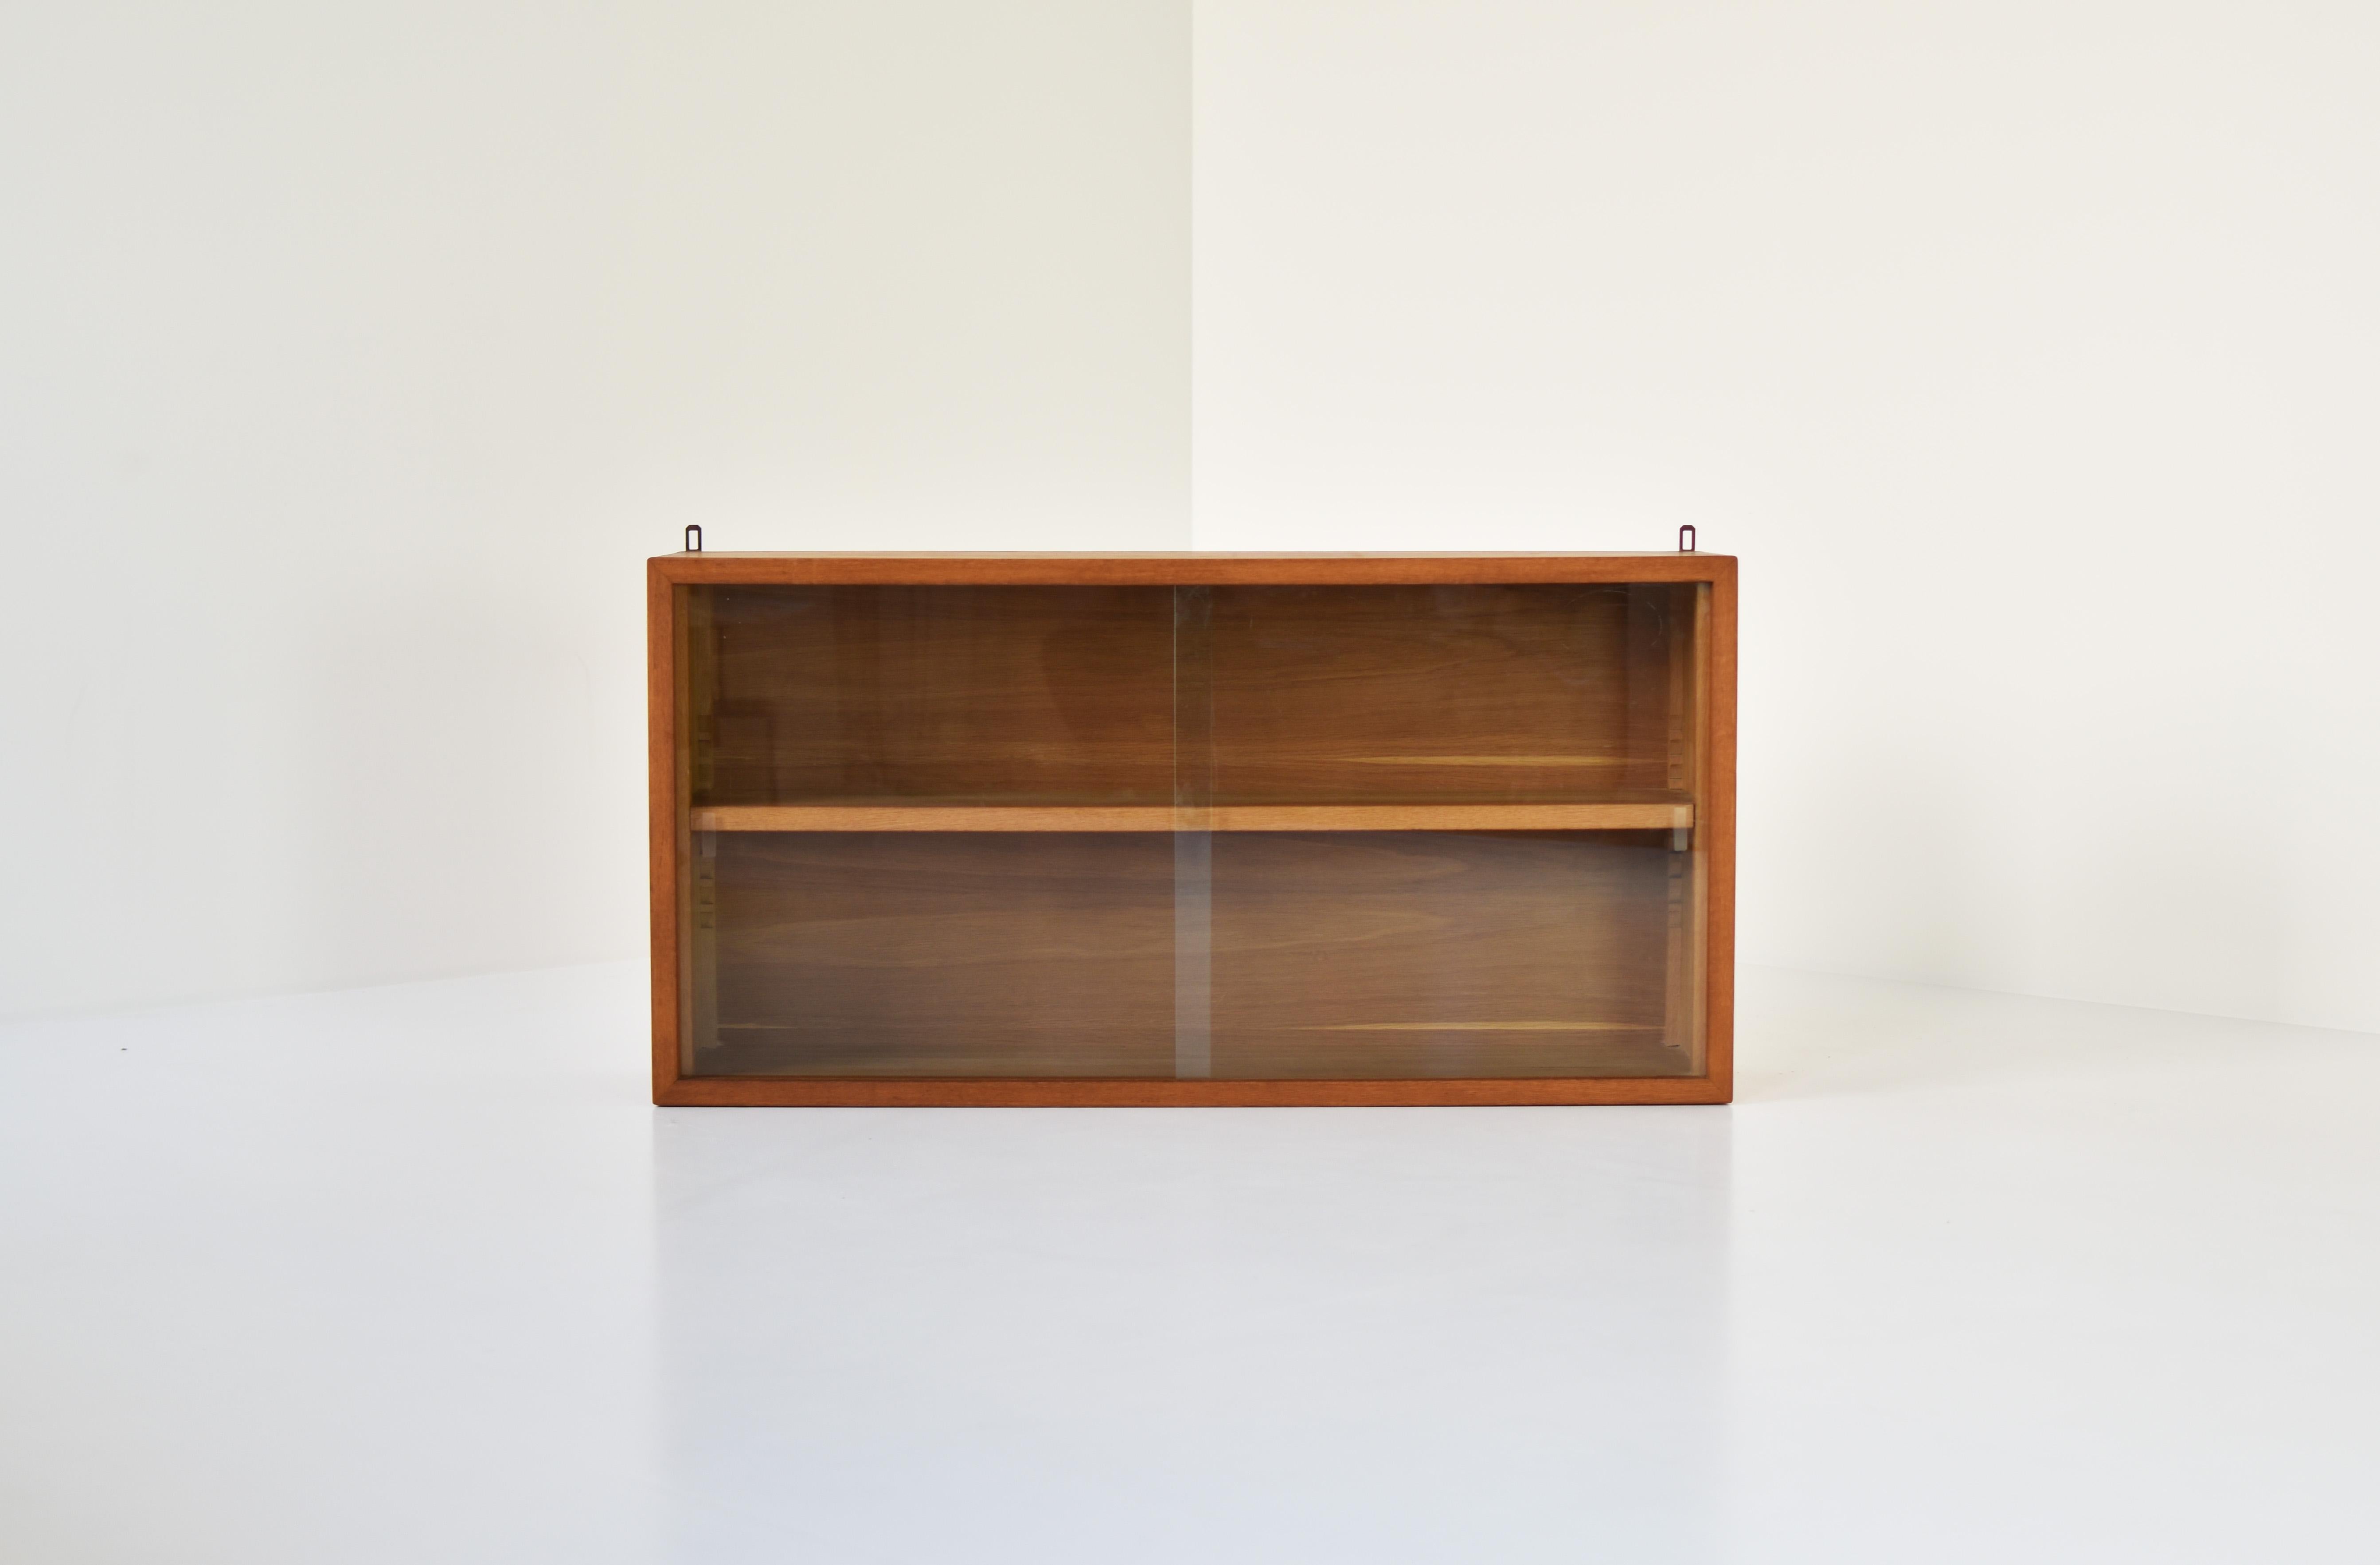 Elegant vitrine cabinet from France, 1950s. This hanging cabinet is made out of oak and has one adjustable shelf and two glass front sliding panels. Restored with love.